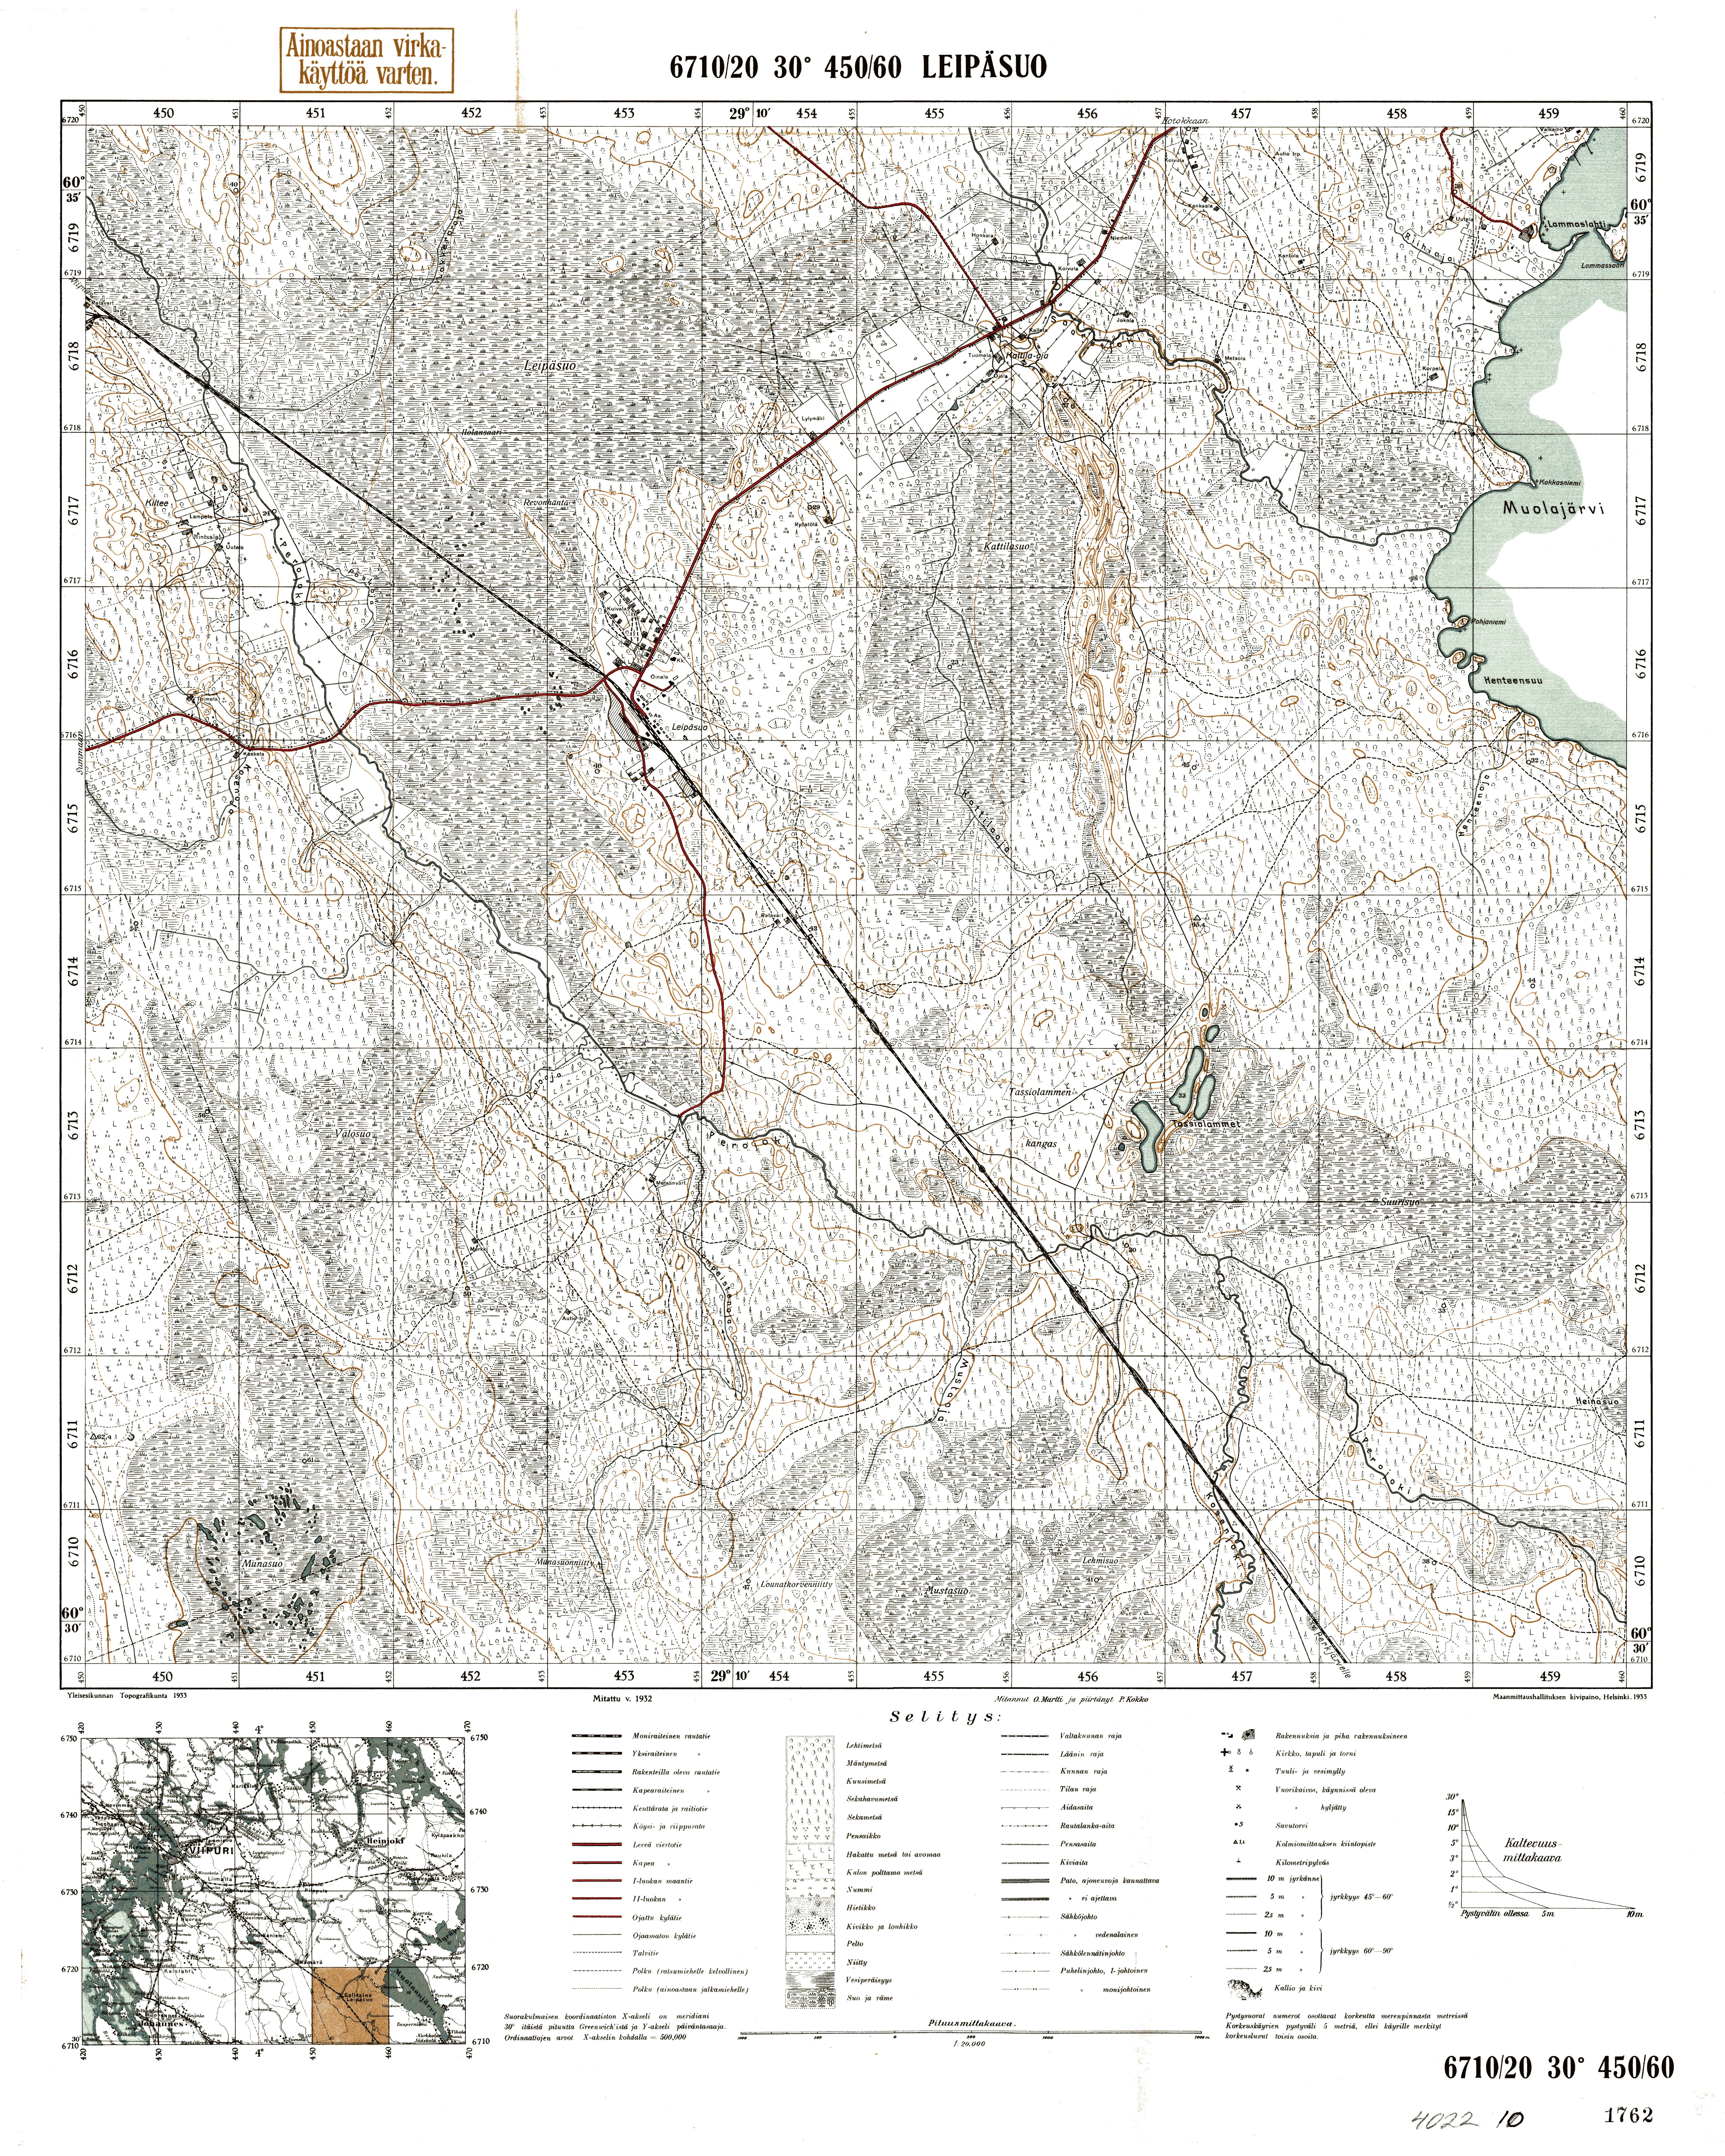 Leipjasuo. Leipäsuo. Topografikartta 402210. Topographic map from 1934. Use the zooming tool to explore in higher level of detail. Obtain as a quality print or high resolution image